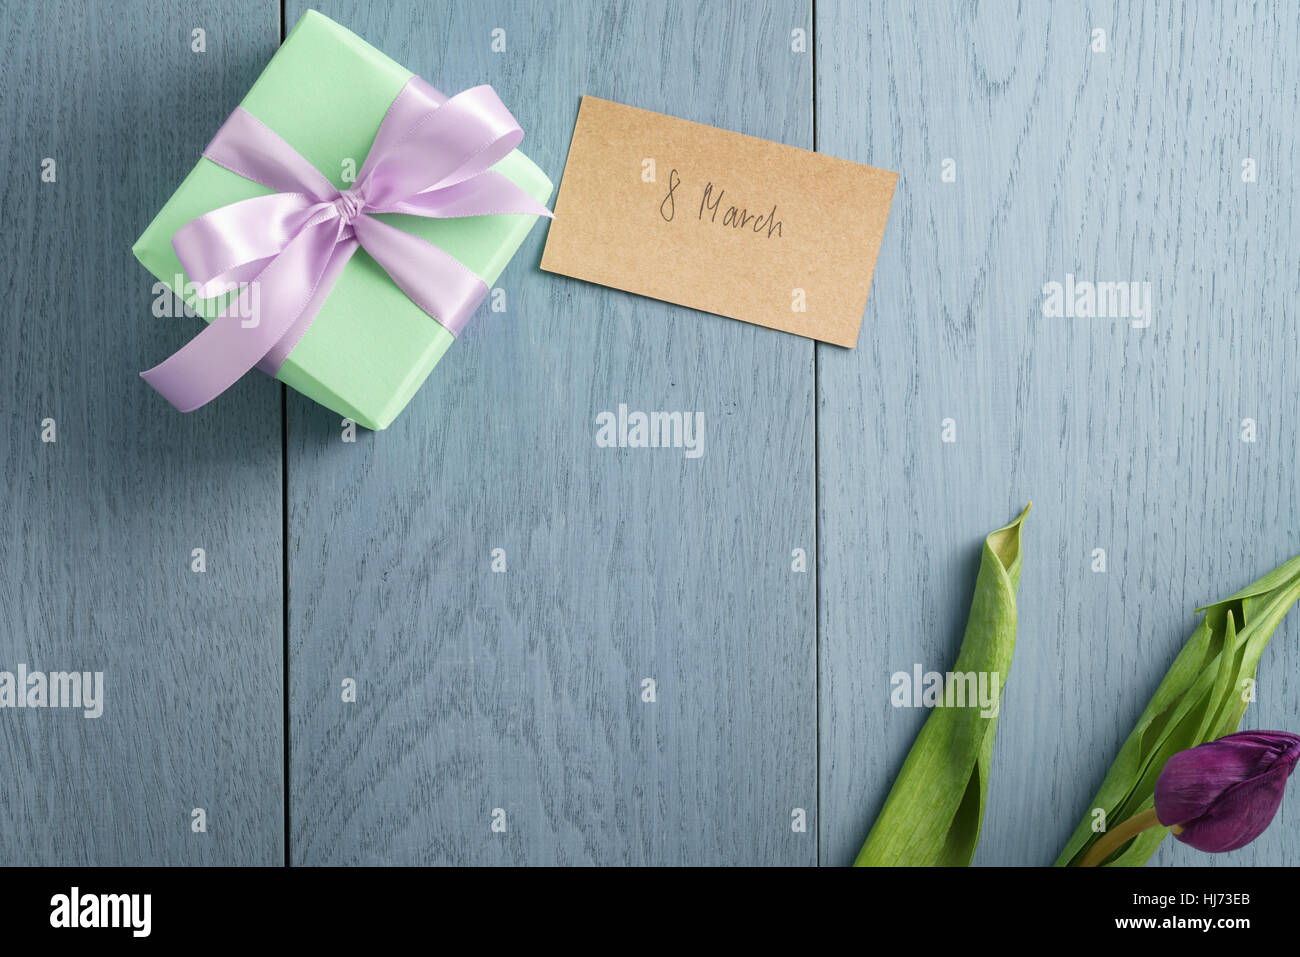 green gift box on blue wood table with paper card for 8 march Stock Photo